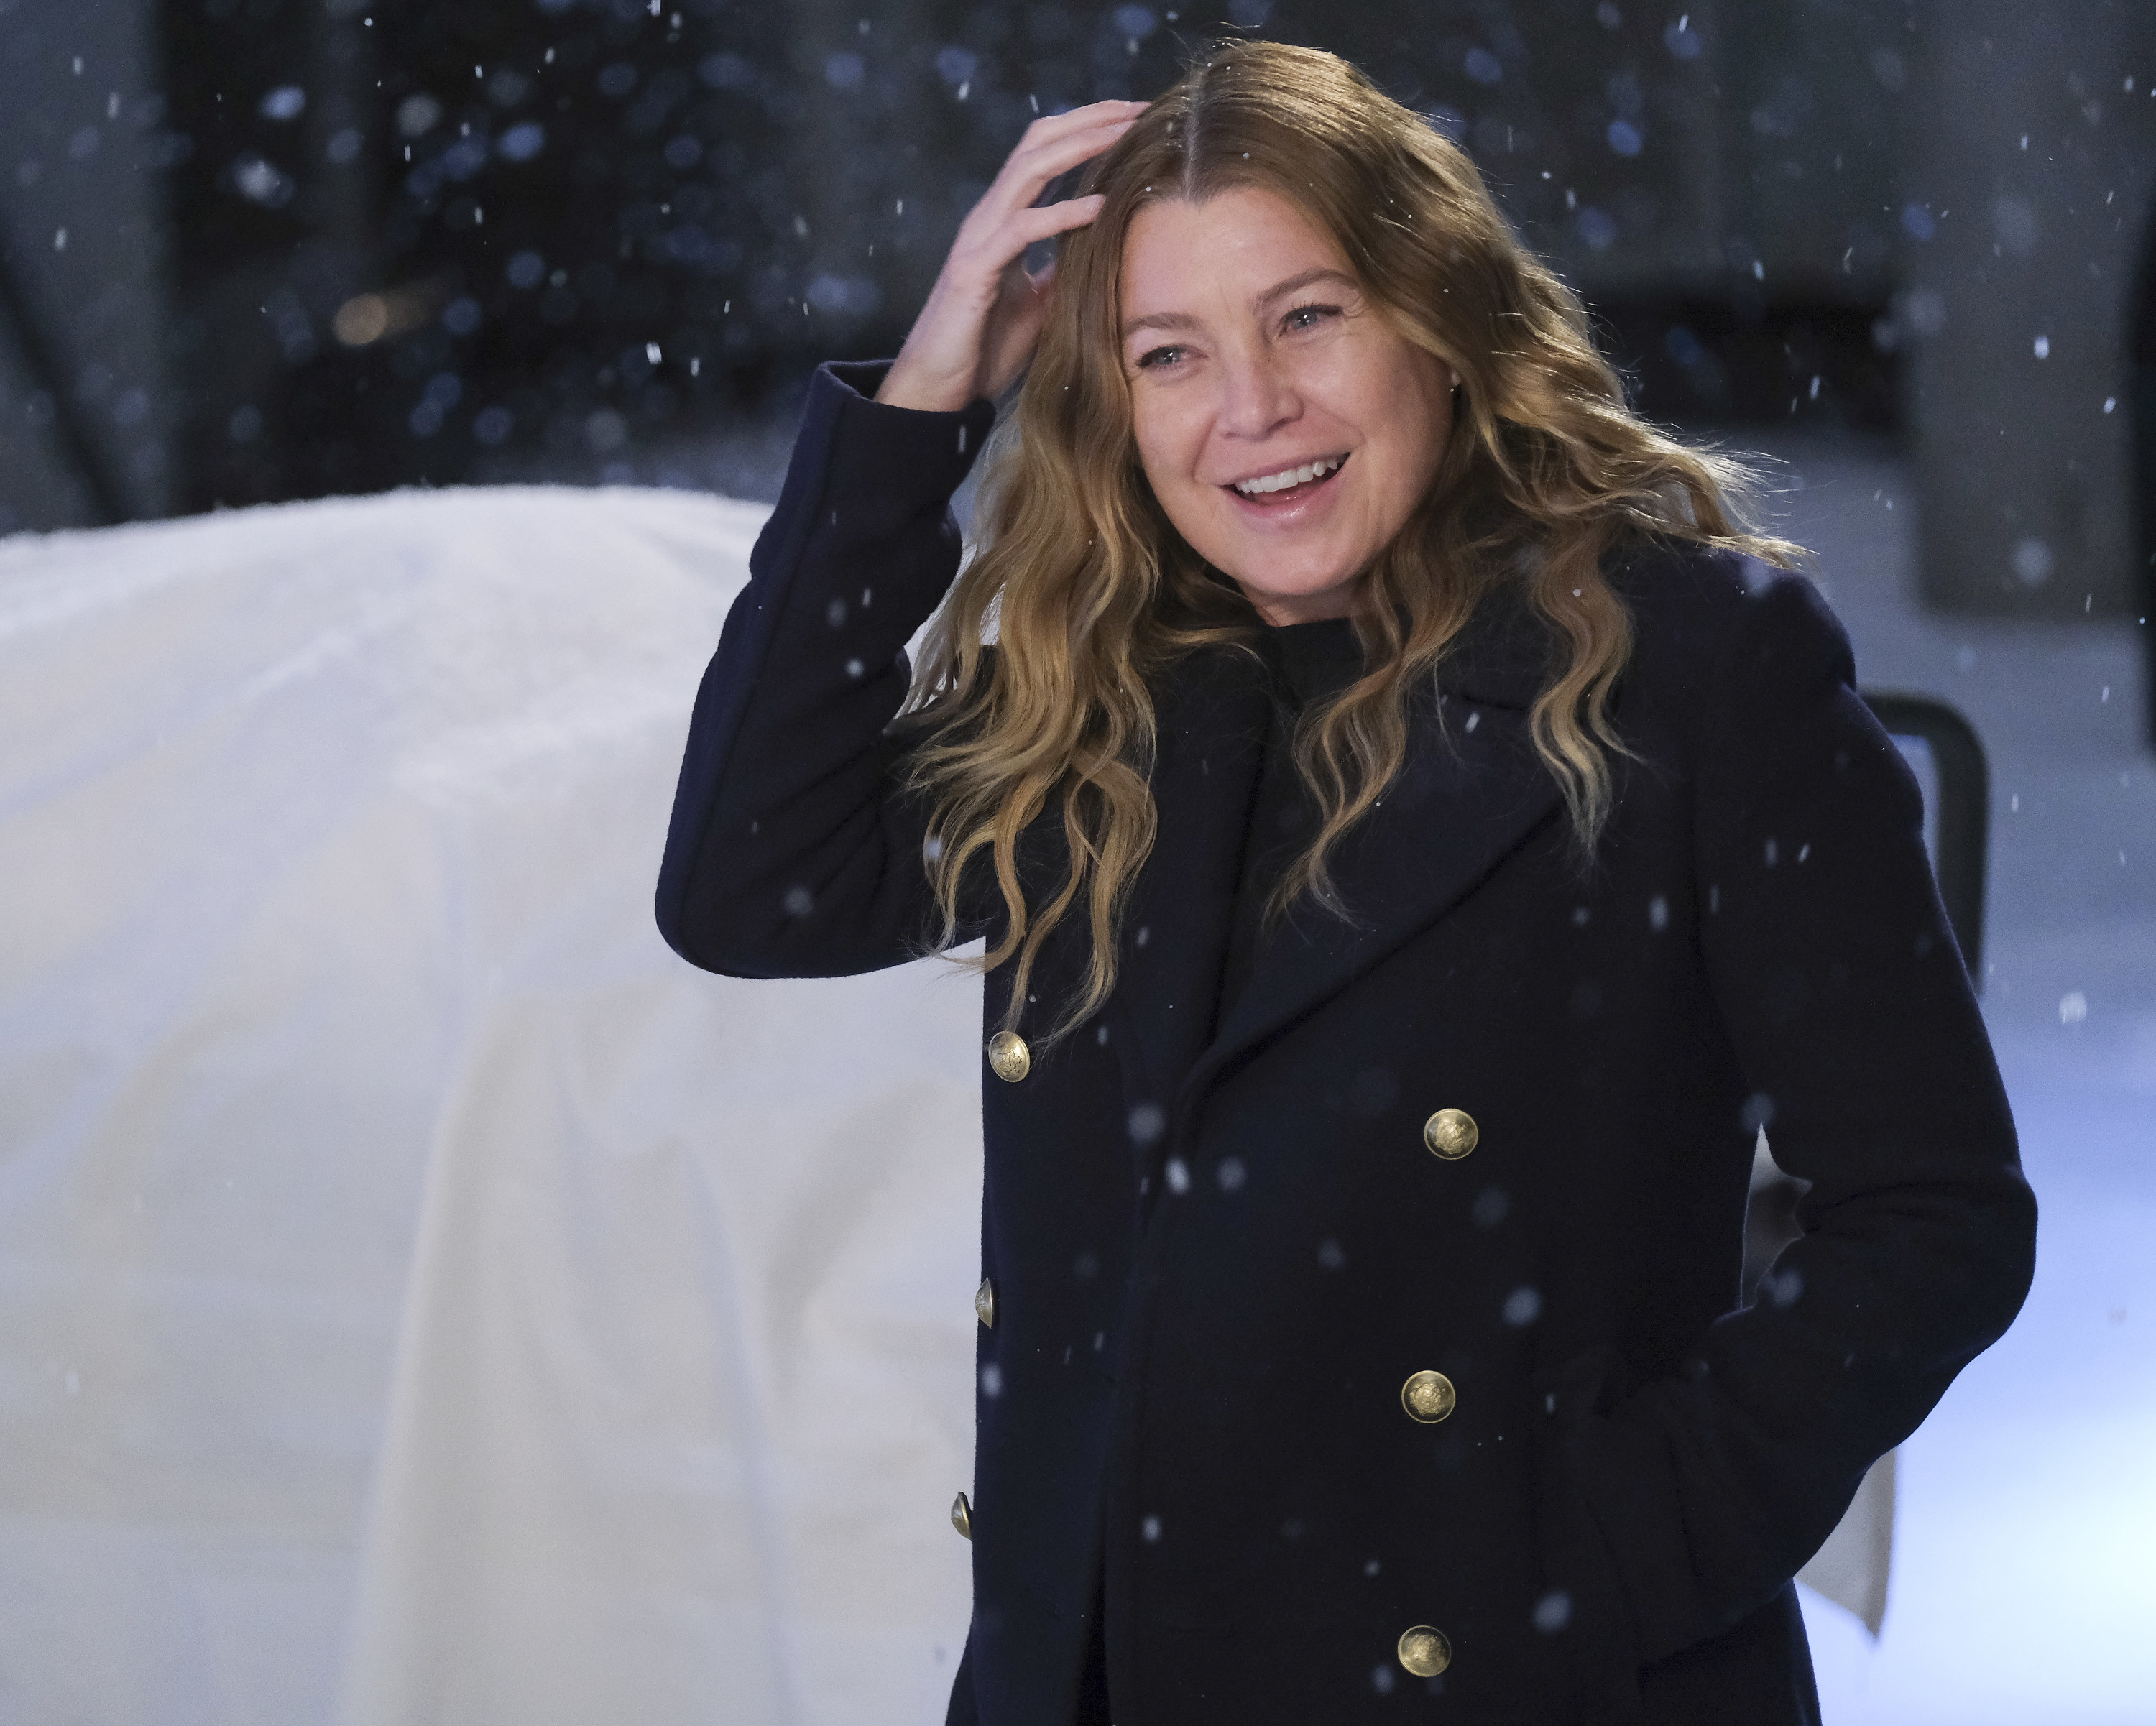 Pompeo touches her hair in the snow